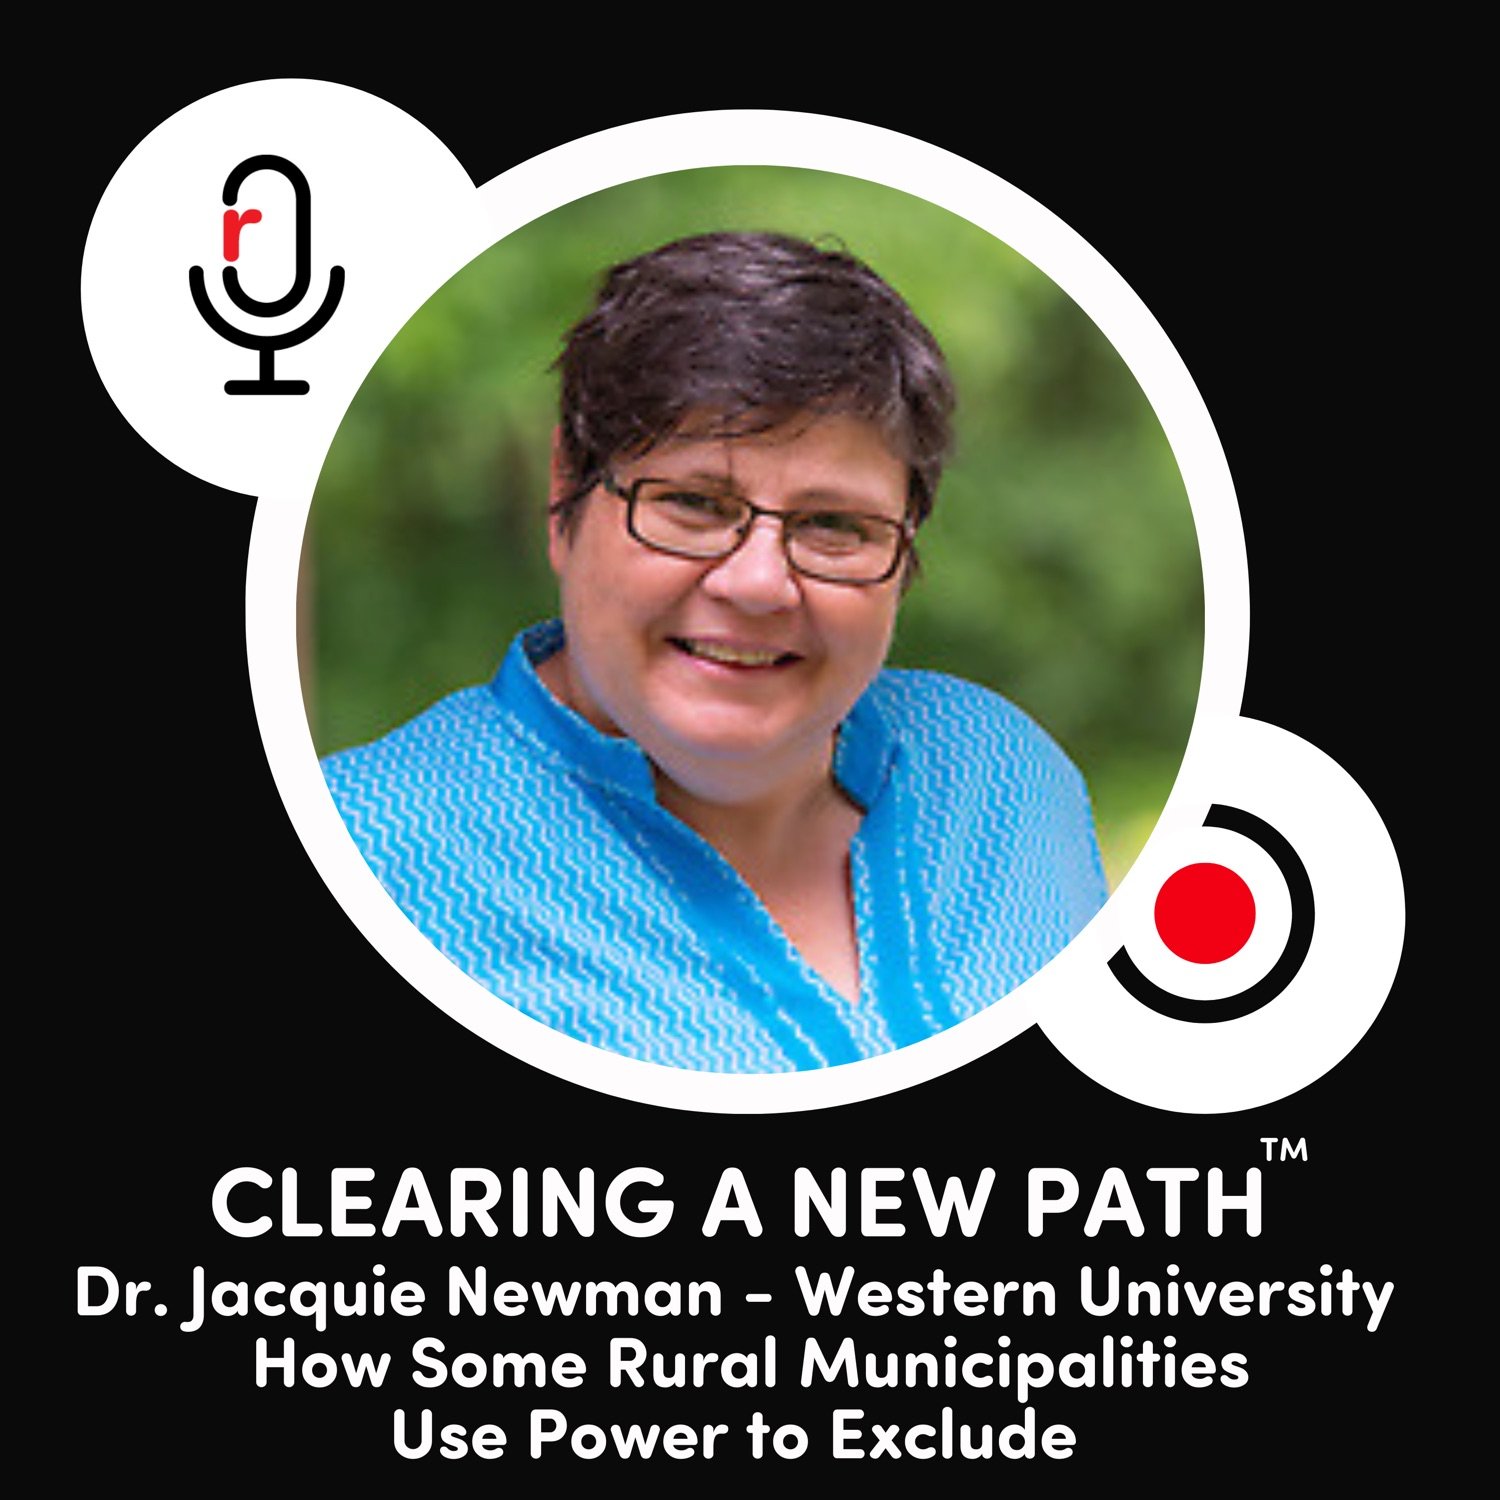 Dr. Jaquie Newman - How Some Rural Municipalities Use Power to Exclude